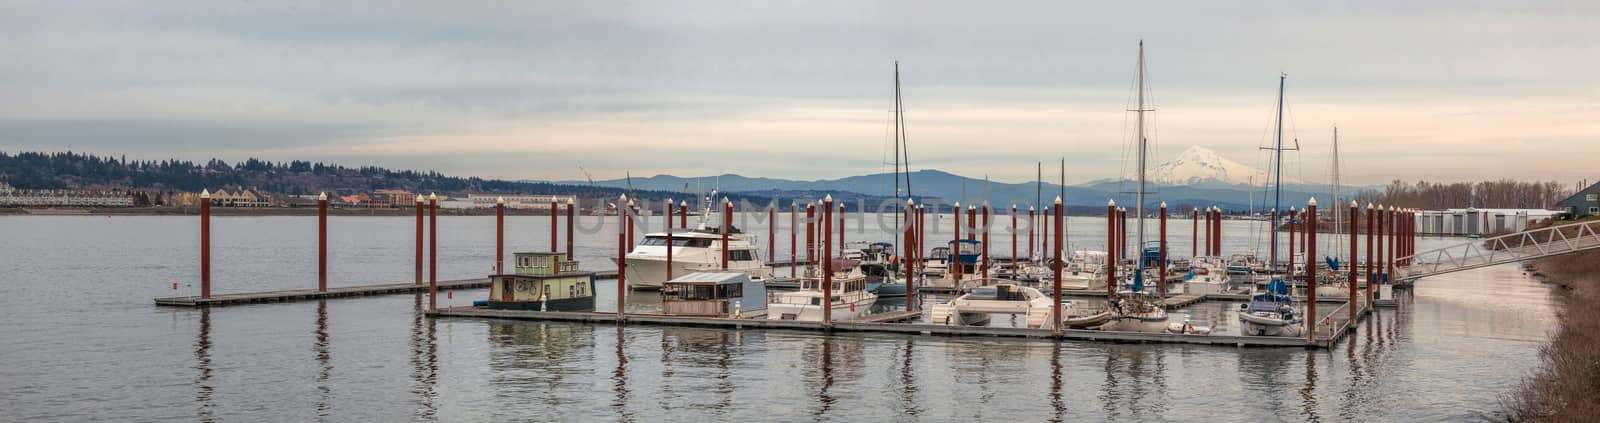 Marina on Columbia River with Mount Hood View and Waterfront Condominiums Panorama